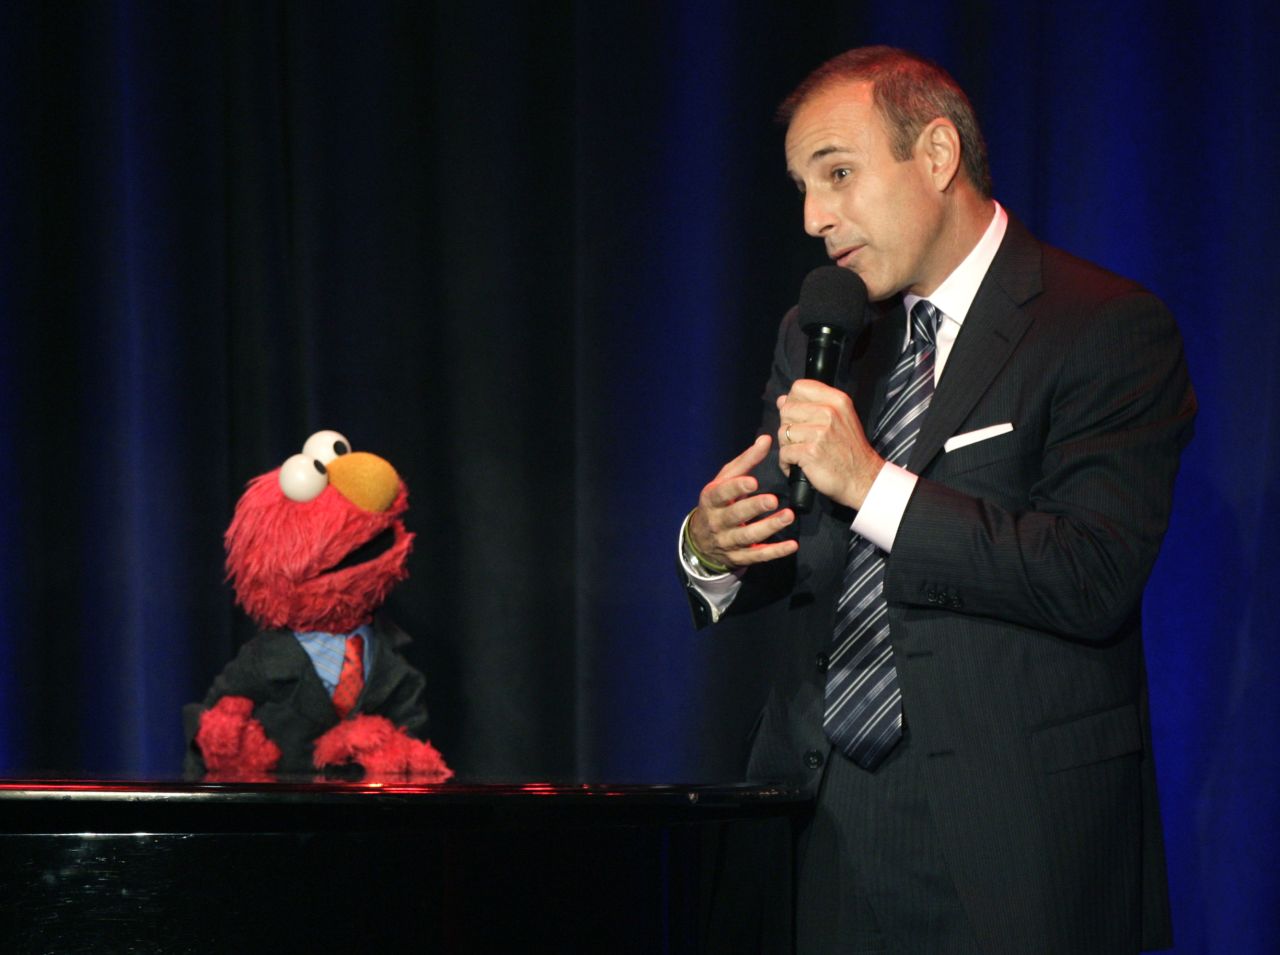 Lauer speaks with Elmo at the Sesame Workshop's Fifth Annual Benefit Dinner in New York in May 2007.